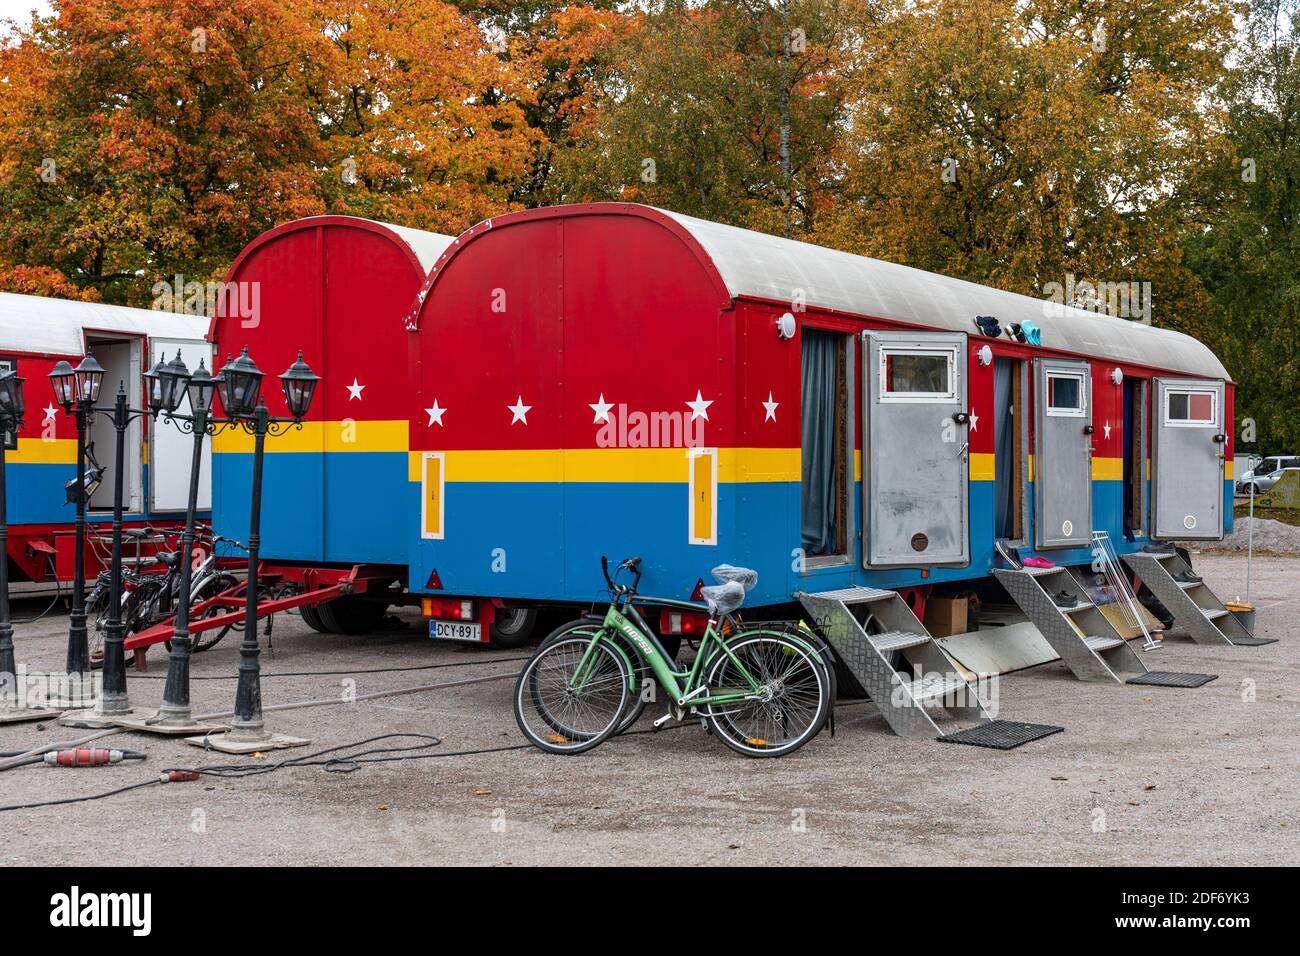 Circus wagons or circus trailers or circus mobile homes in Kaisaniemi field in Helsinki, Finland Stock Photo